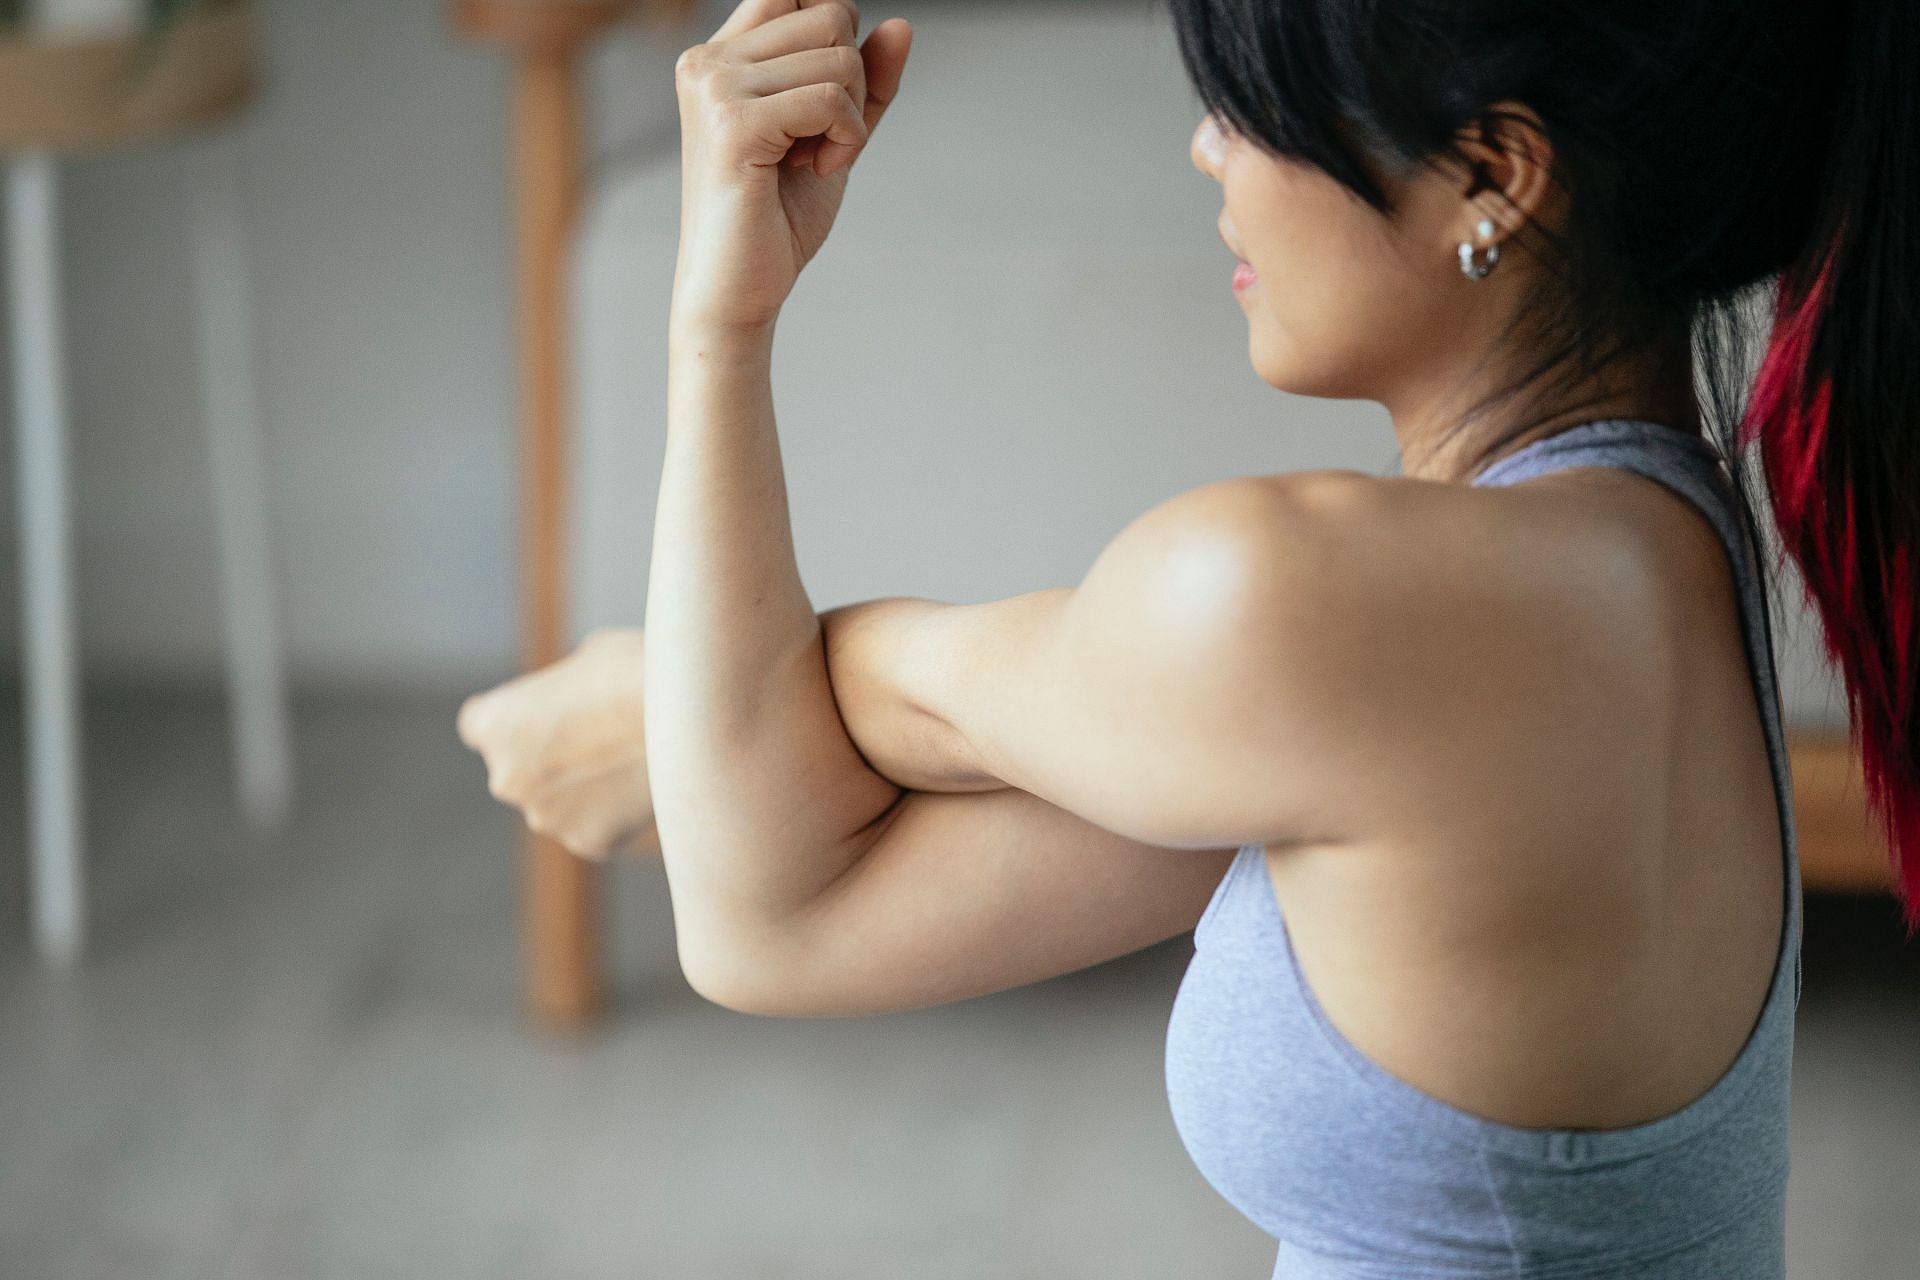 Women's Shoulder Exercises For Strength And Tone, by Miss__Azka